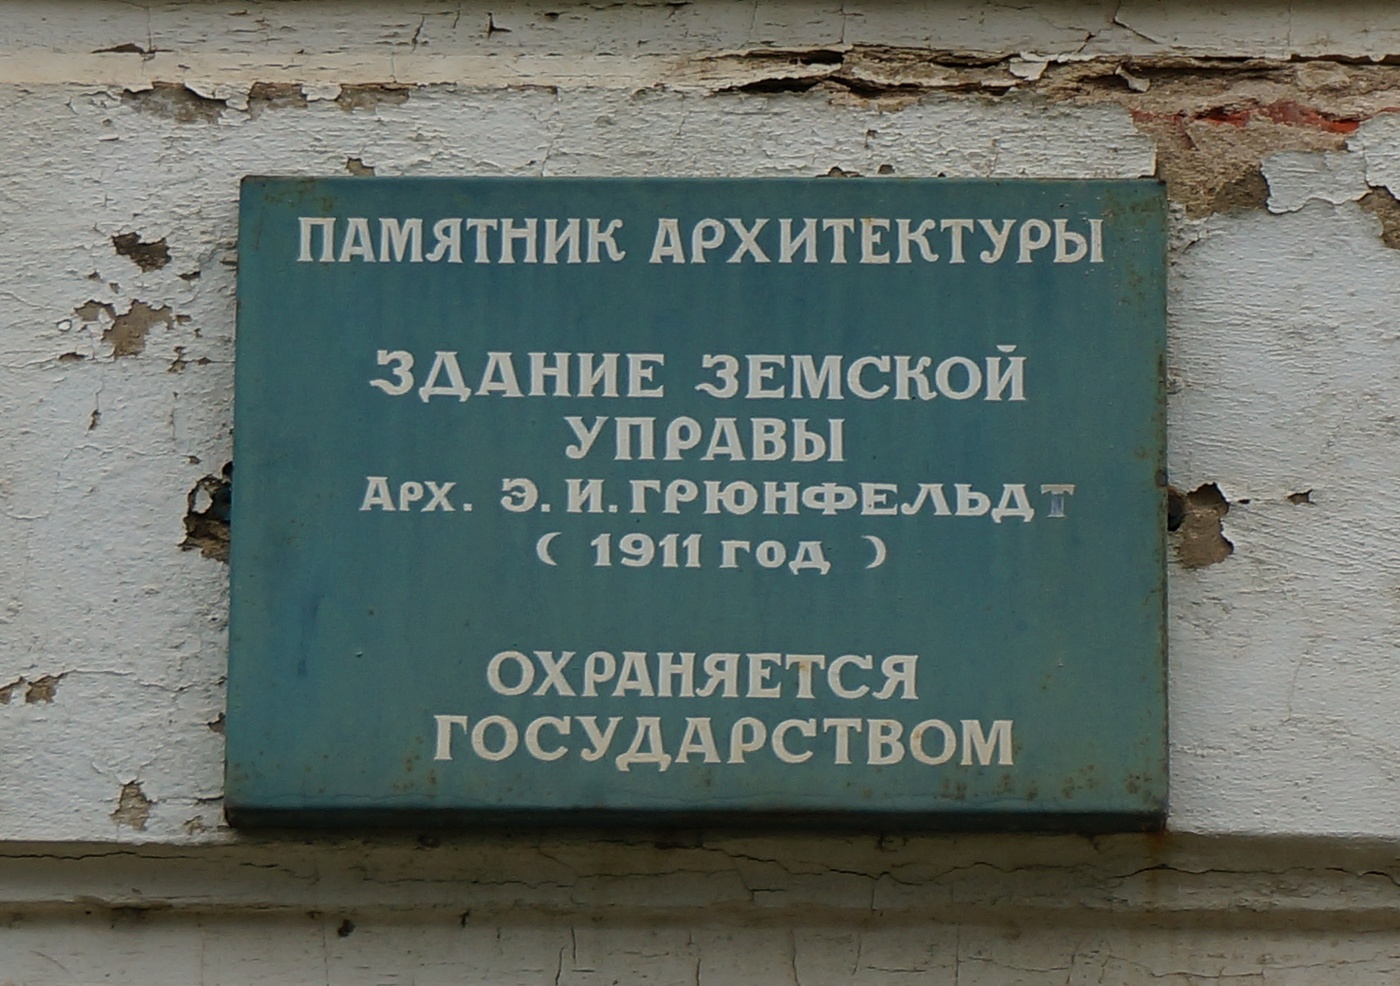 Osa, Советская улица, 30. Osa — Security signs